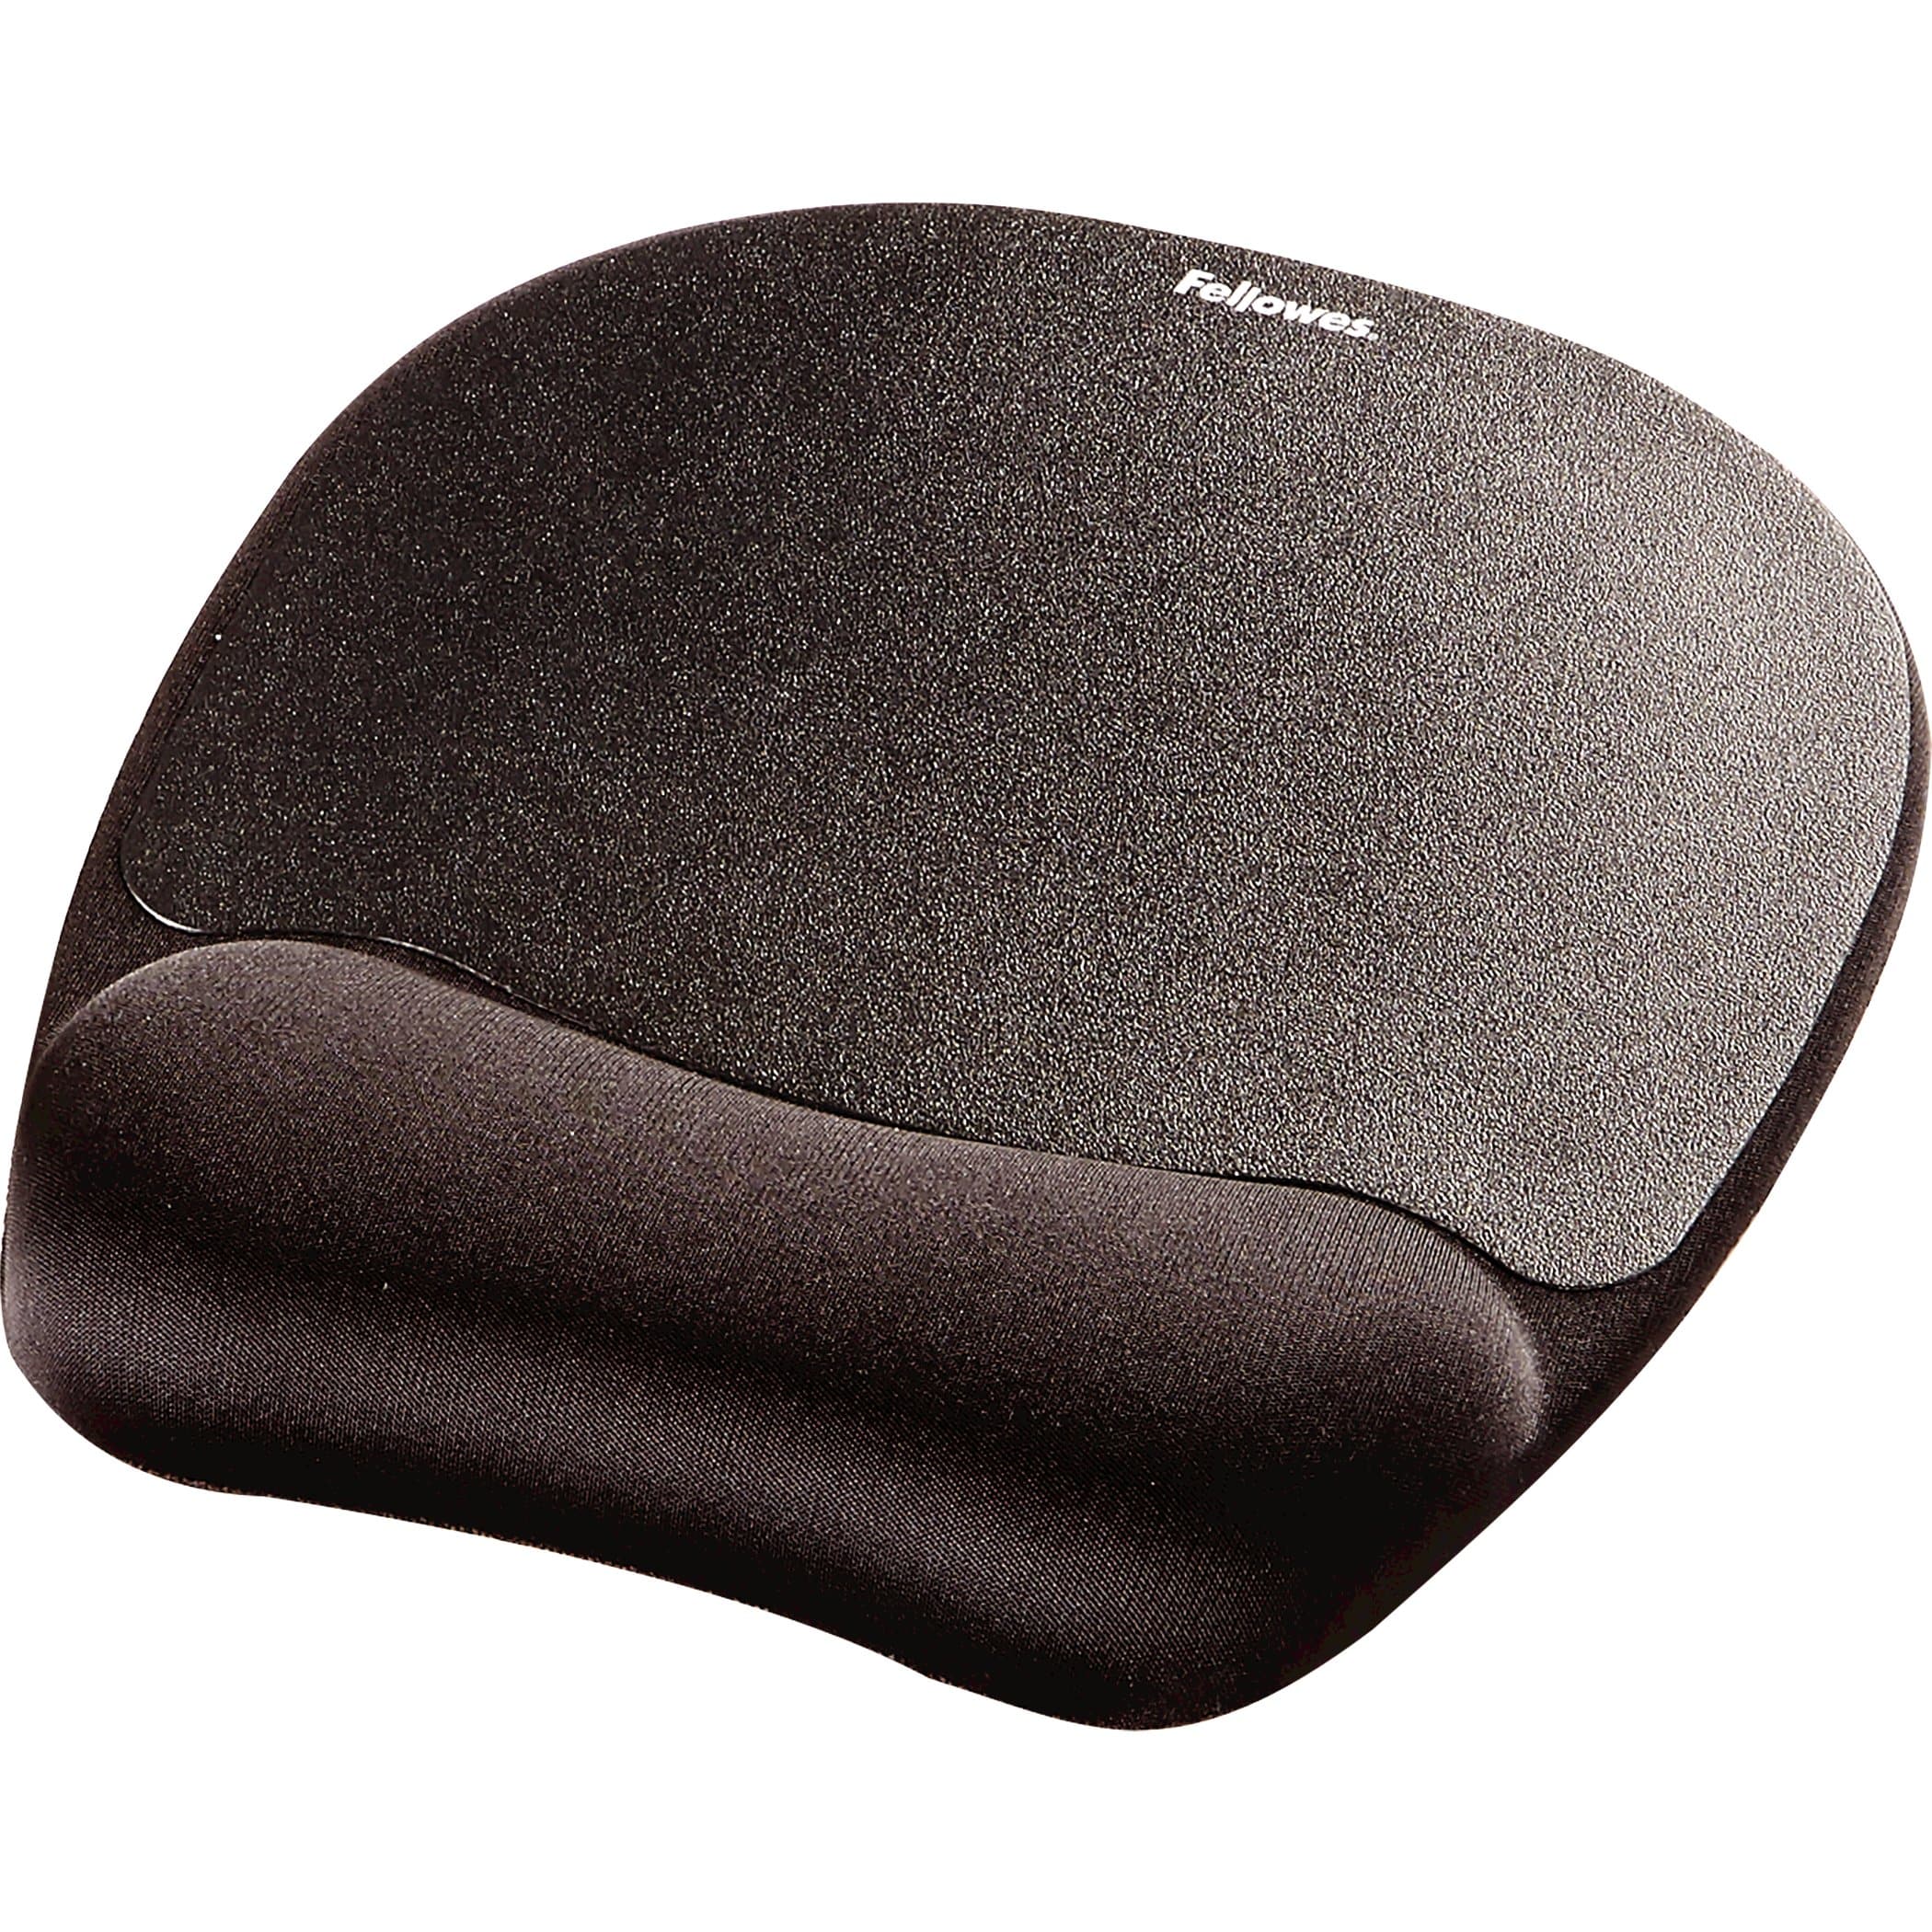 onn. Mouse Pad with Memory Foam Wrist Rest, Black 